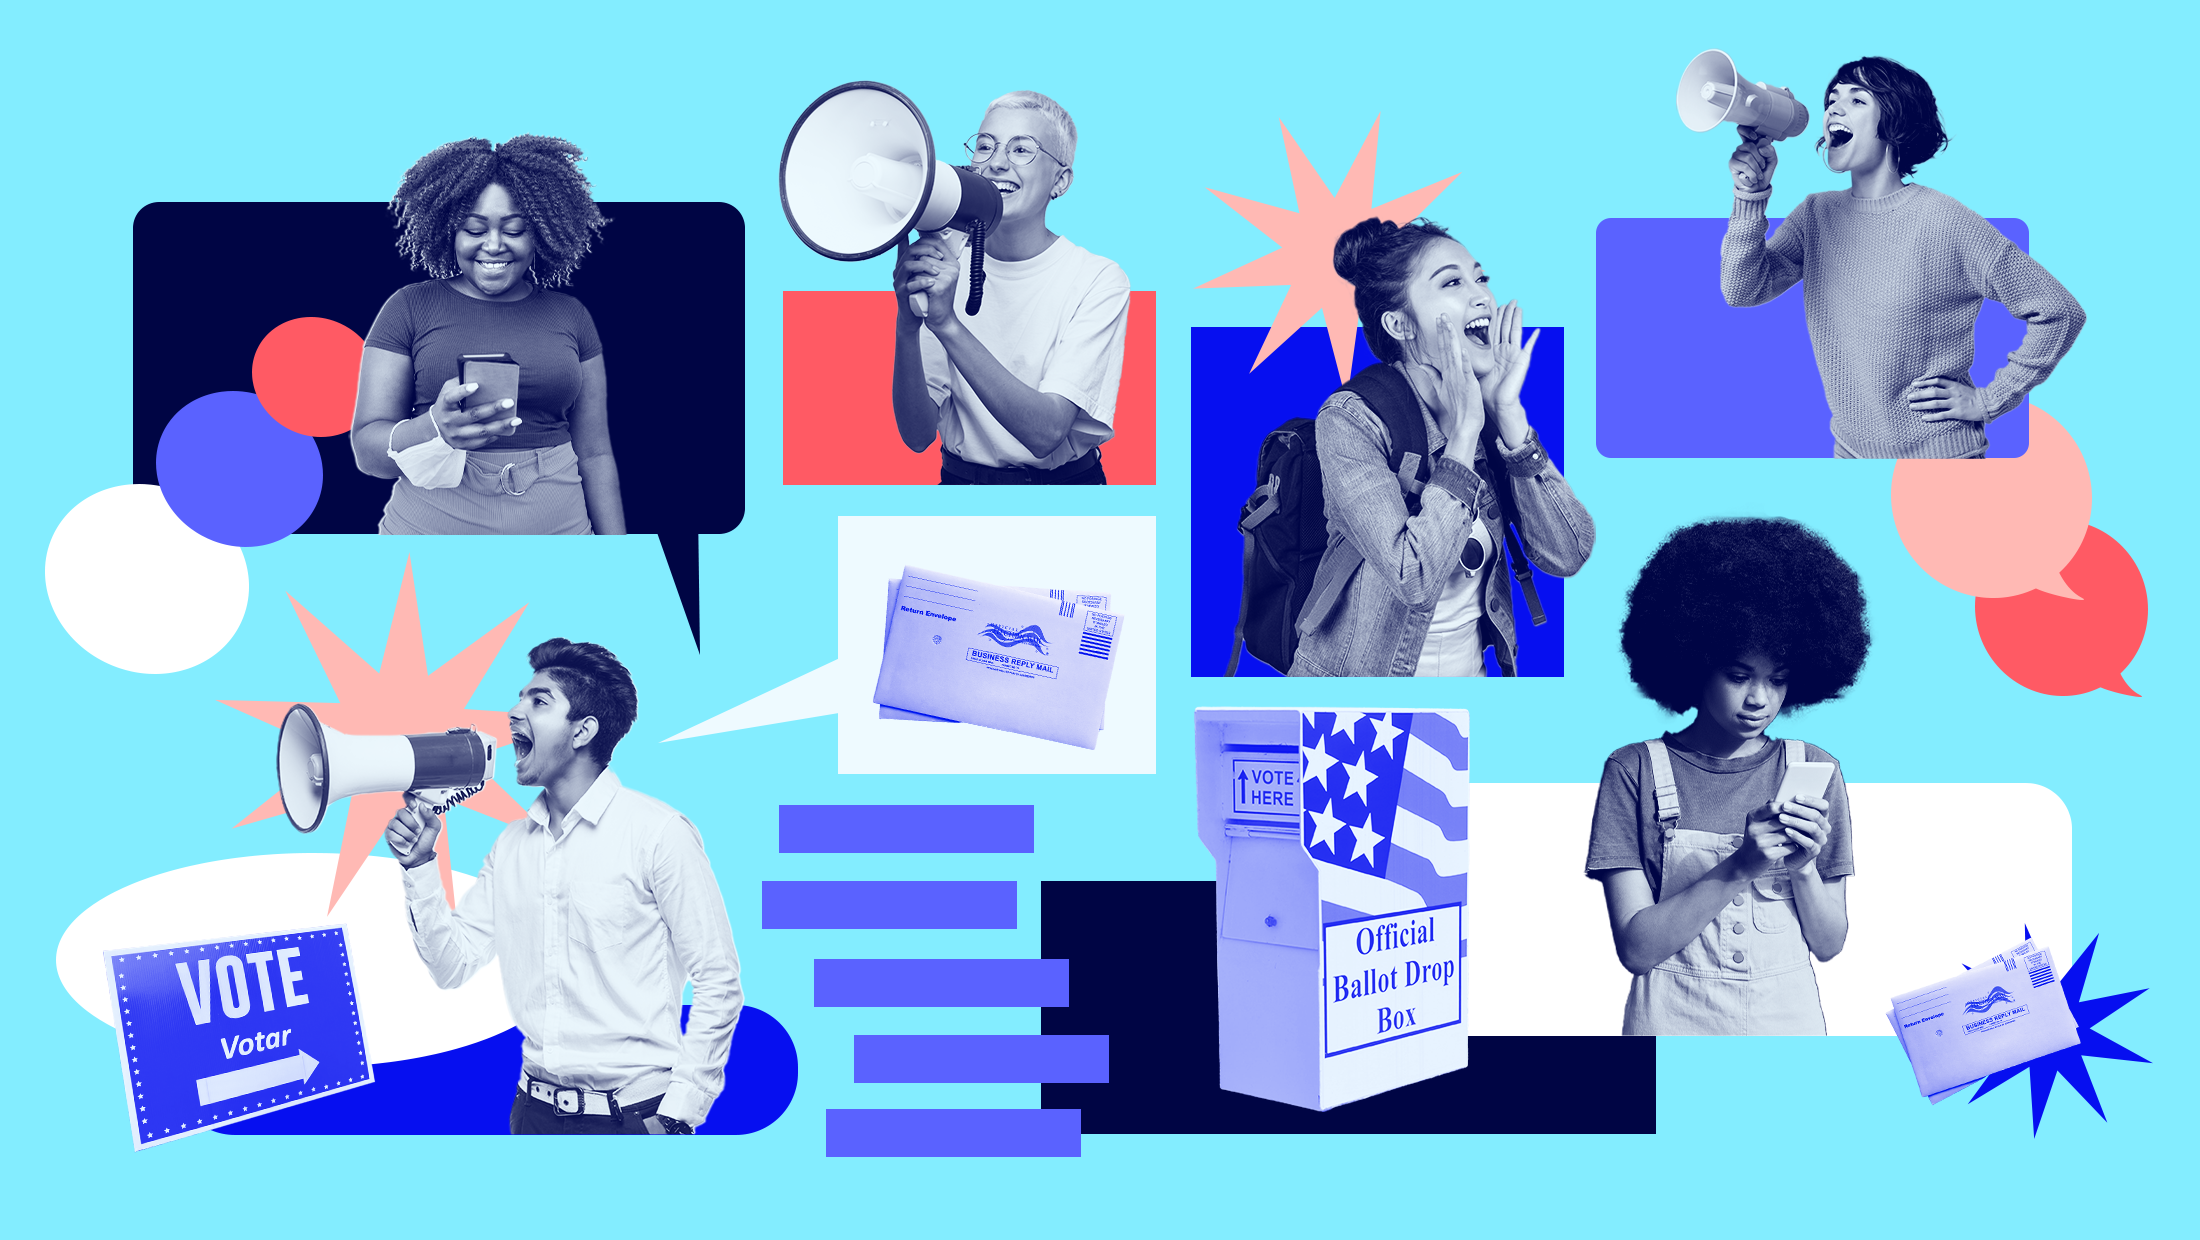 Light blue background with a collage of young voters, some of whom are holding a megaphone and others are looking down at their phones, and other voting symbols such as a blue "VOTE" sign with an arrow, an official ballot drop box and mail-in ballot envelopes. There are also text bubble elements in red tones.